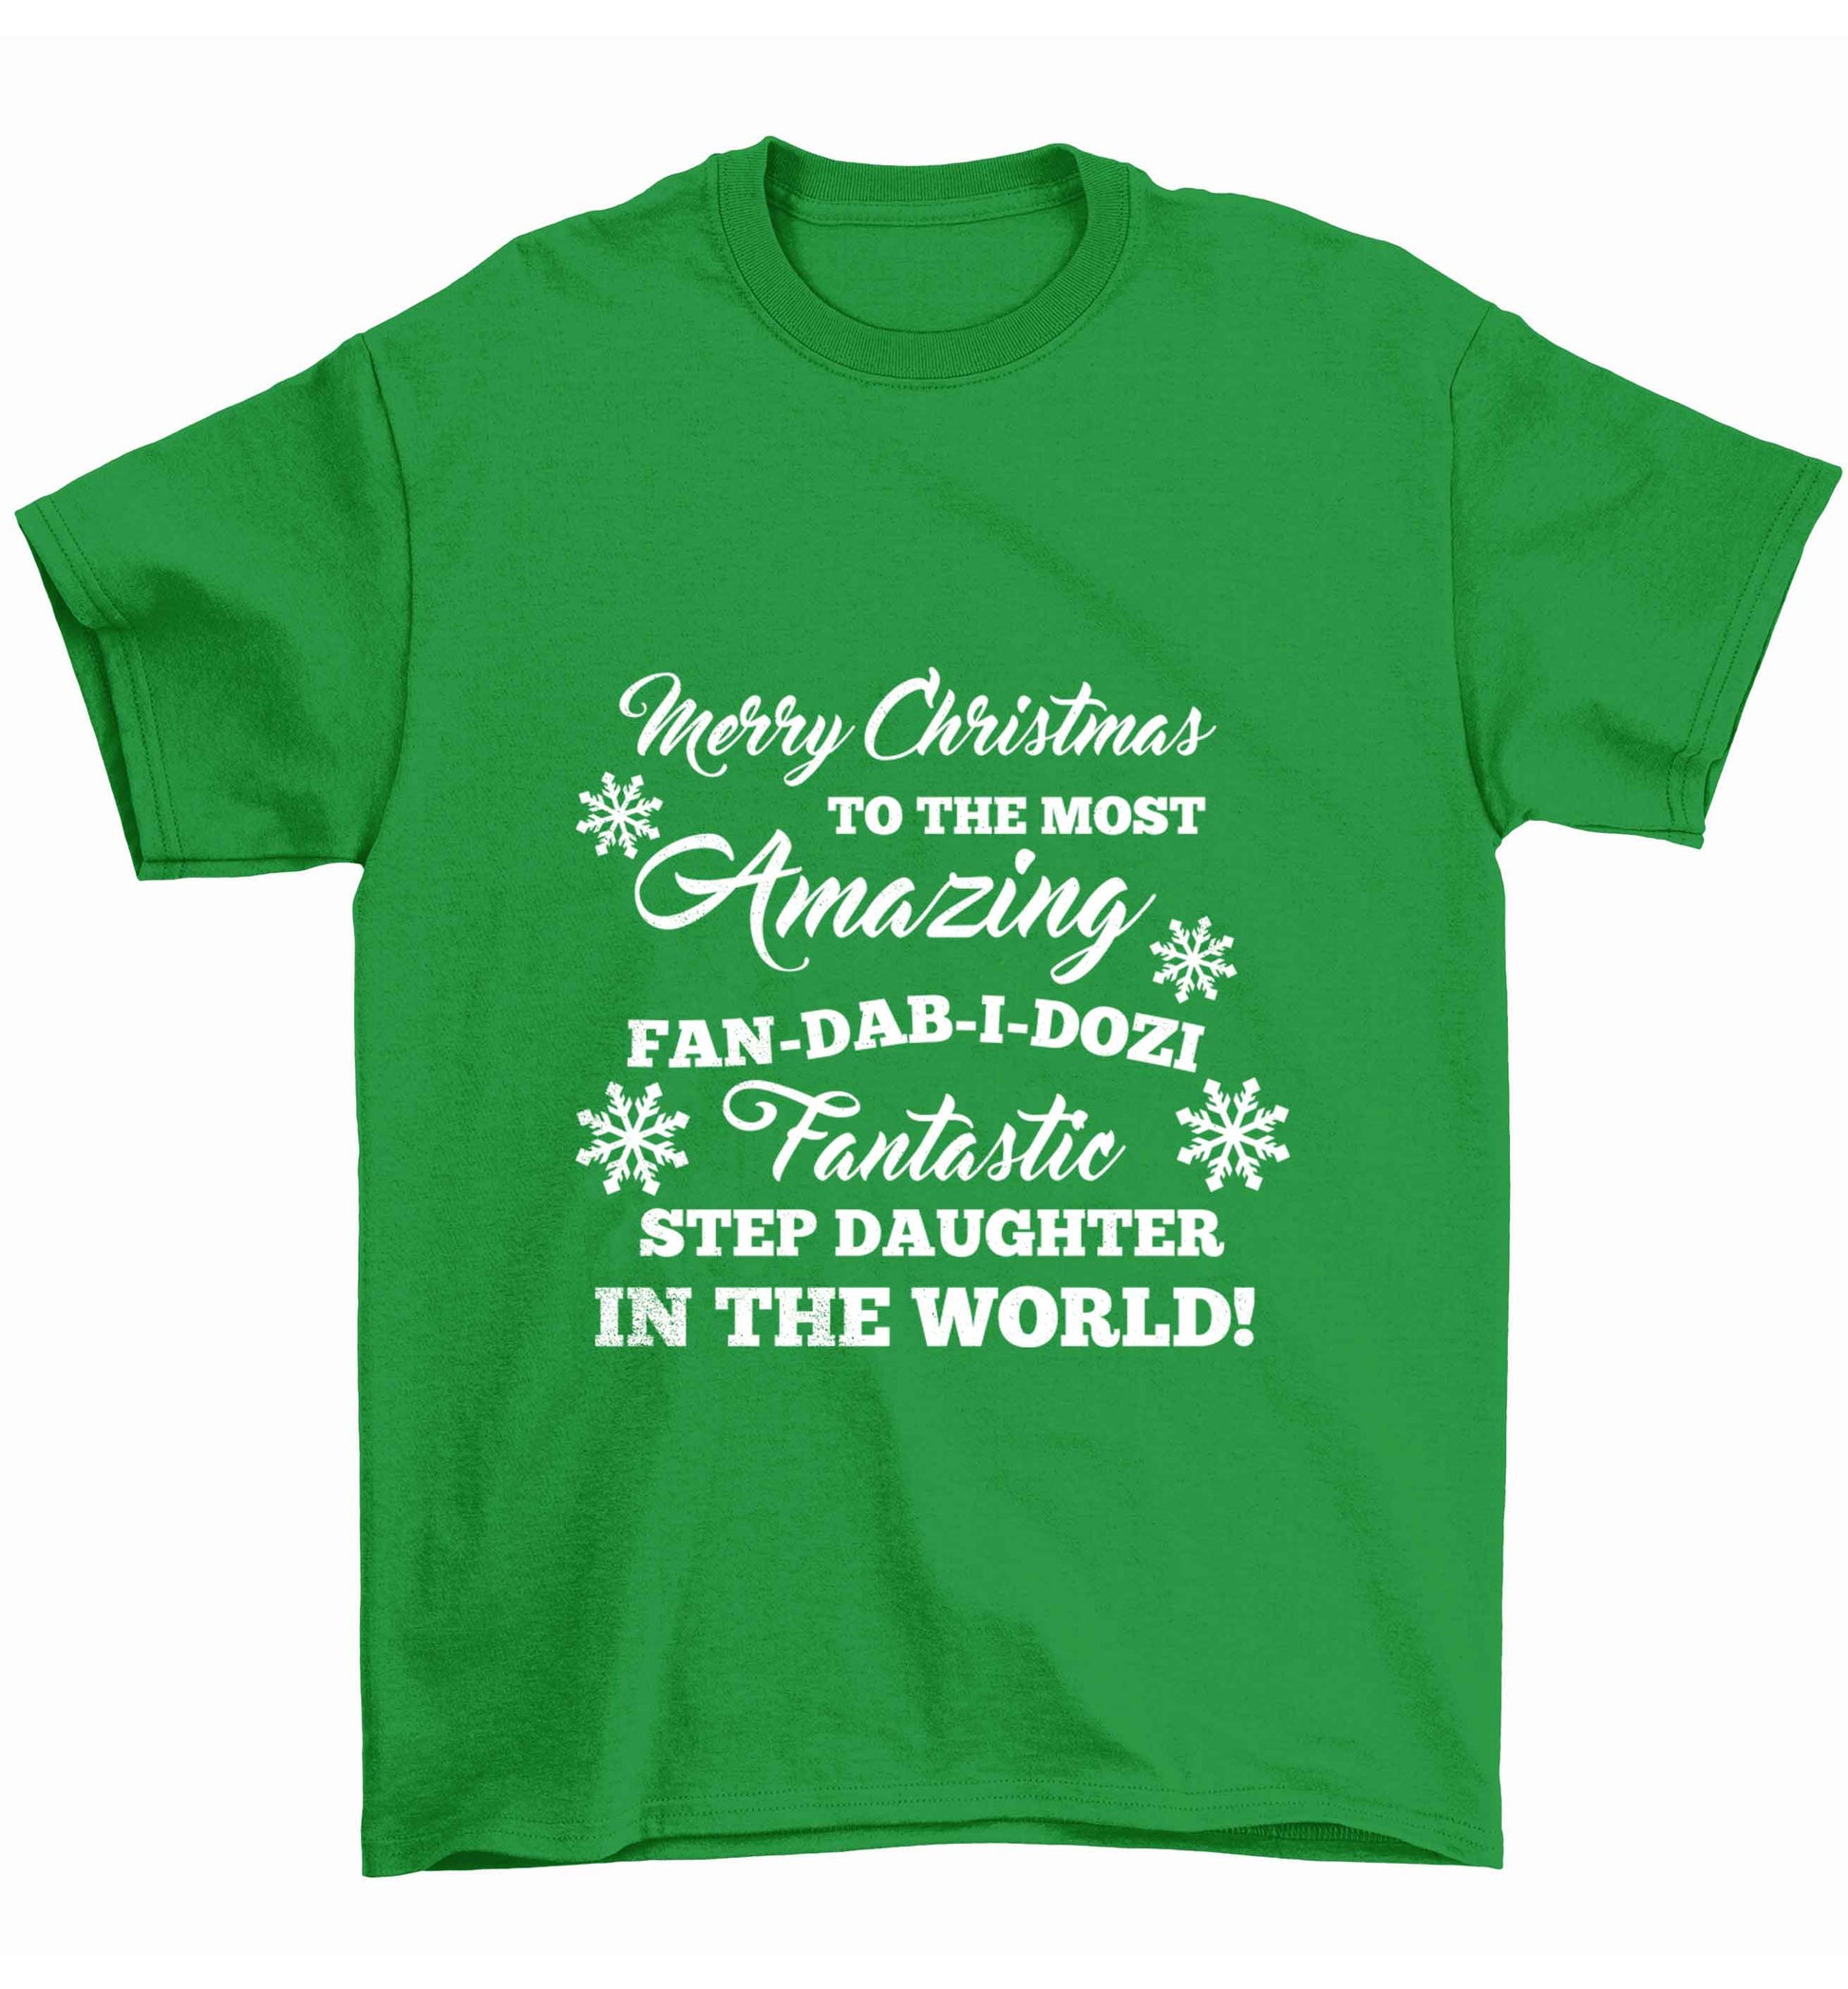 Merry Christmas to the most amazing fan-dab-i-dozi fantasic Step Daughter in the world Children's green Tshirt 12-13 Years